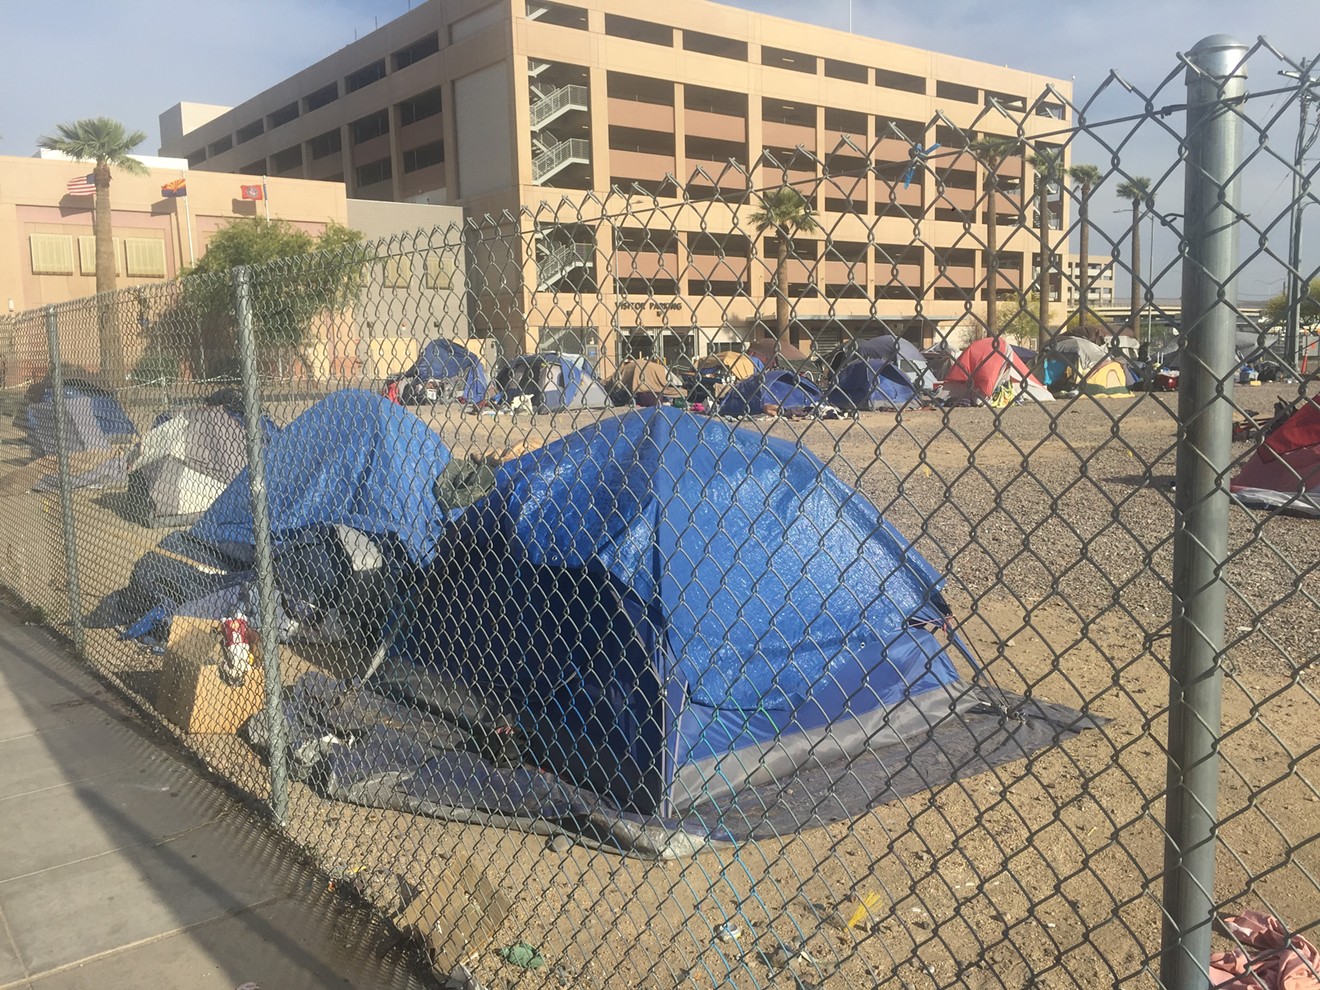 One of the lots used by Maricopa County for temporary camping by homeless people at the corner of West Jefferson Street and South 8th Avenue.